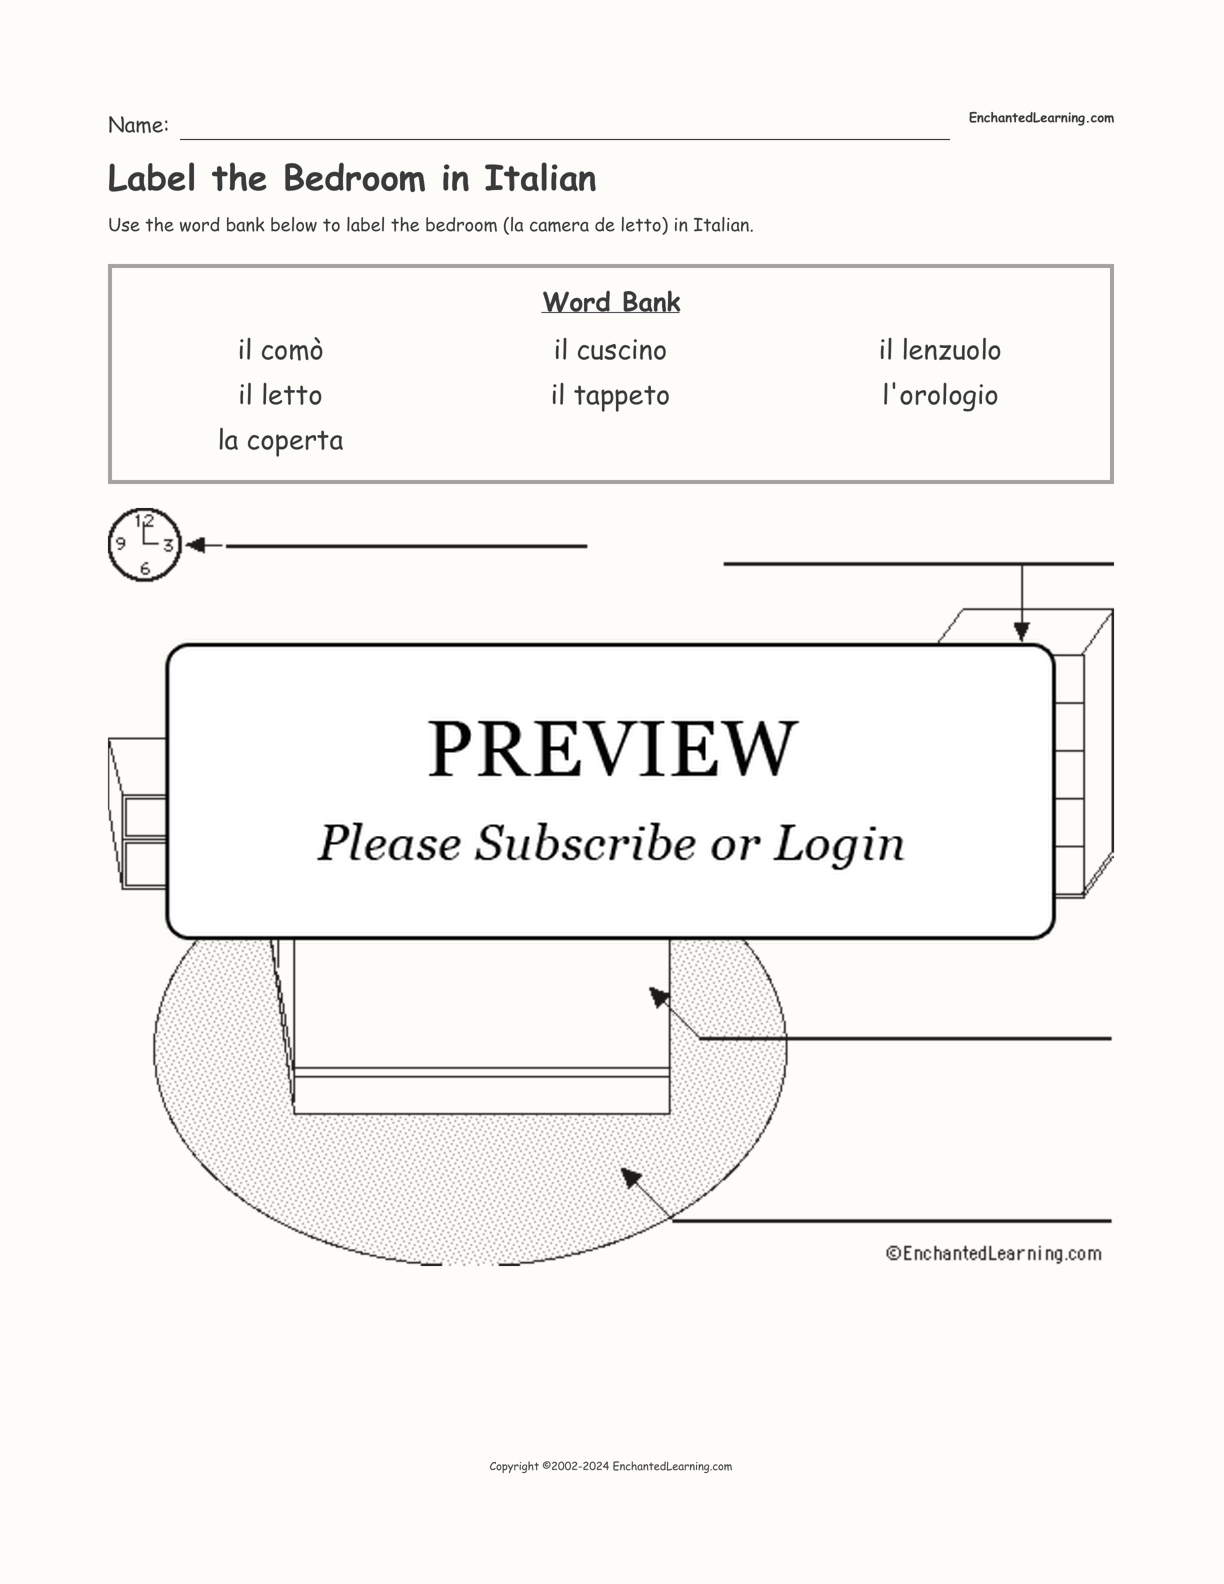 Label the Bedroom in Italian interactive worksheet page 1